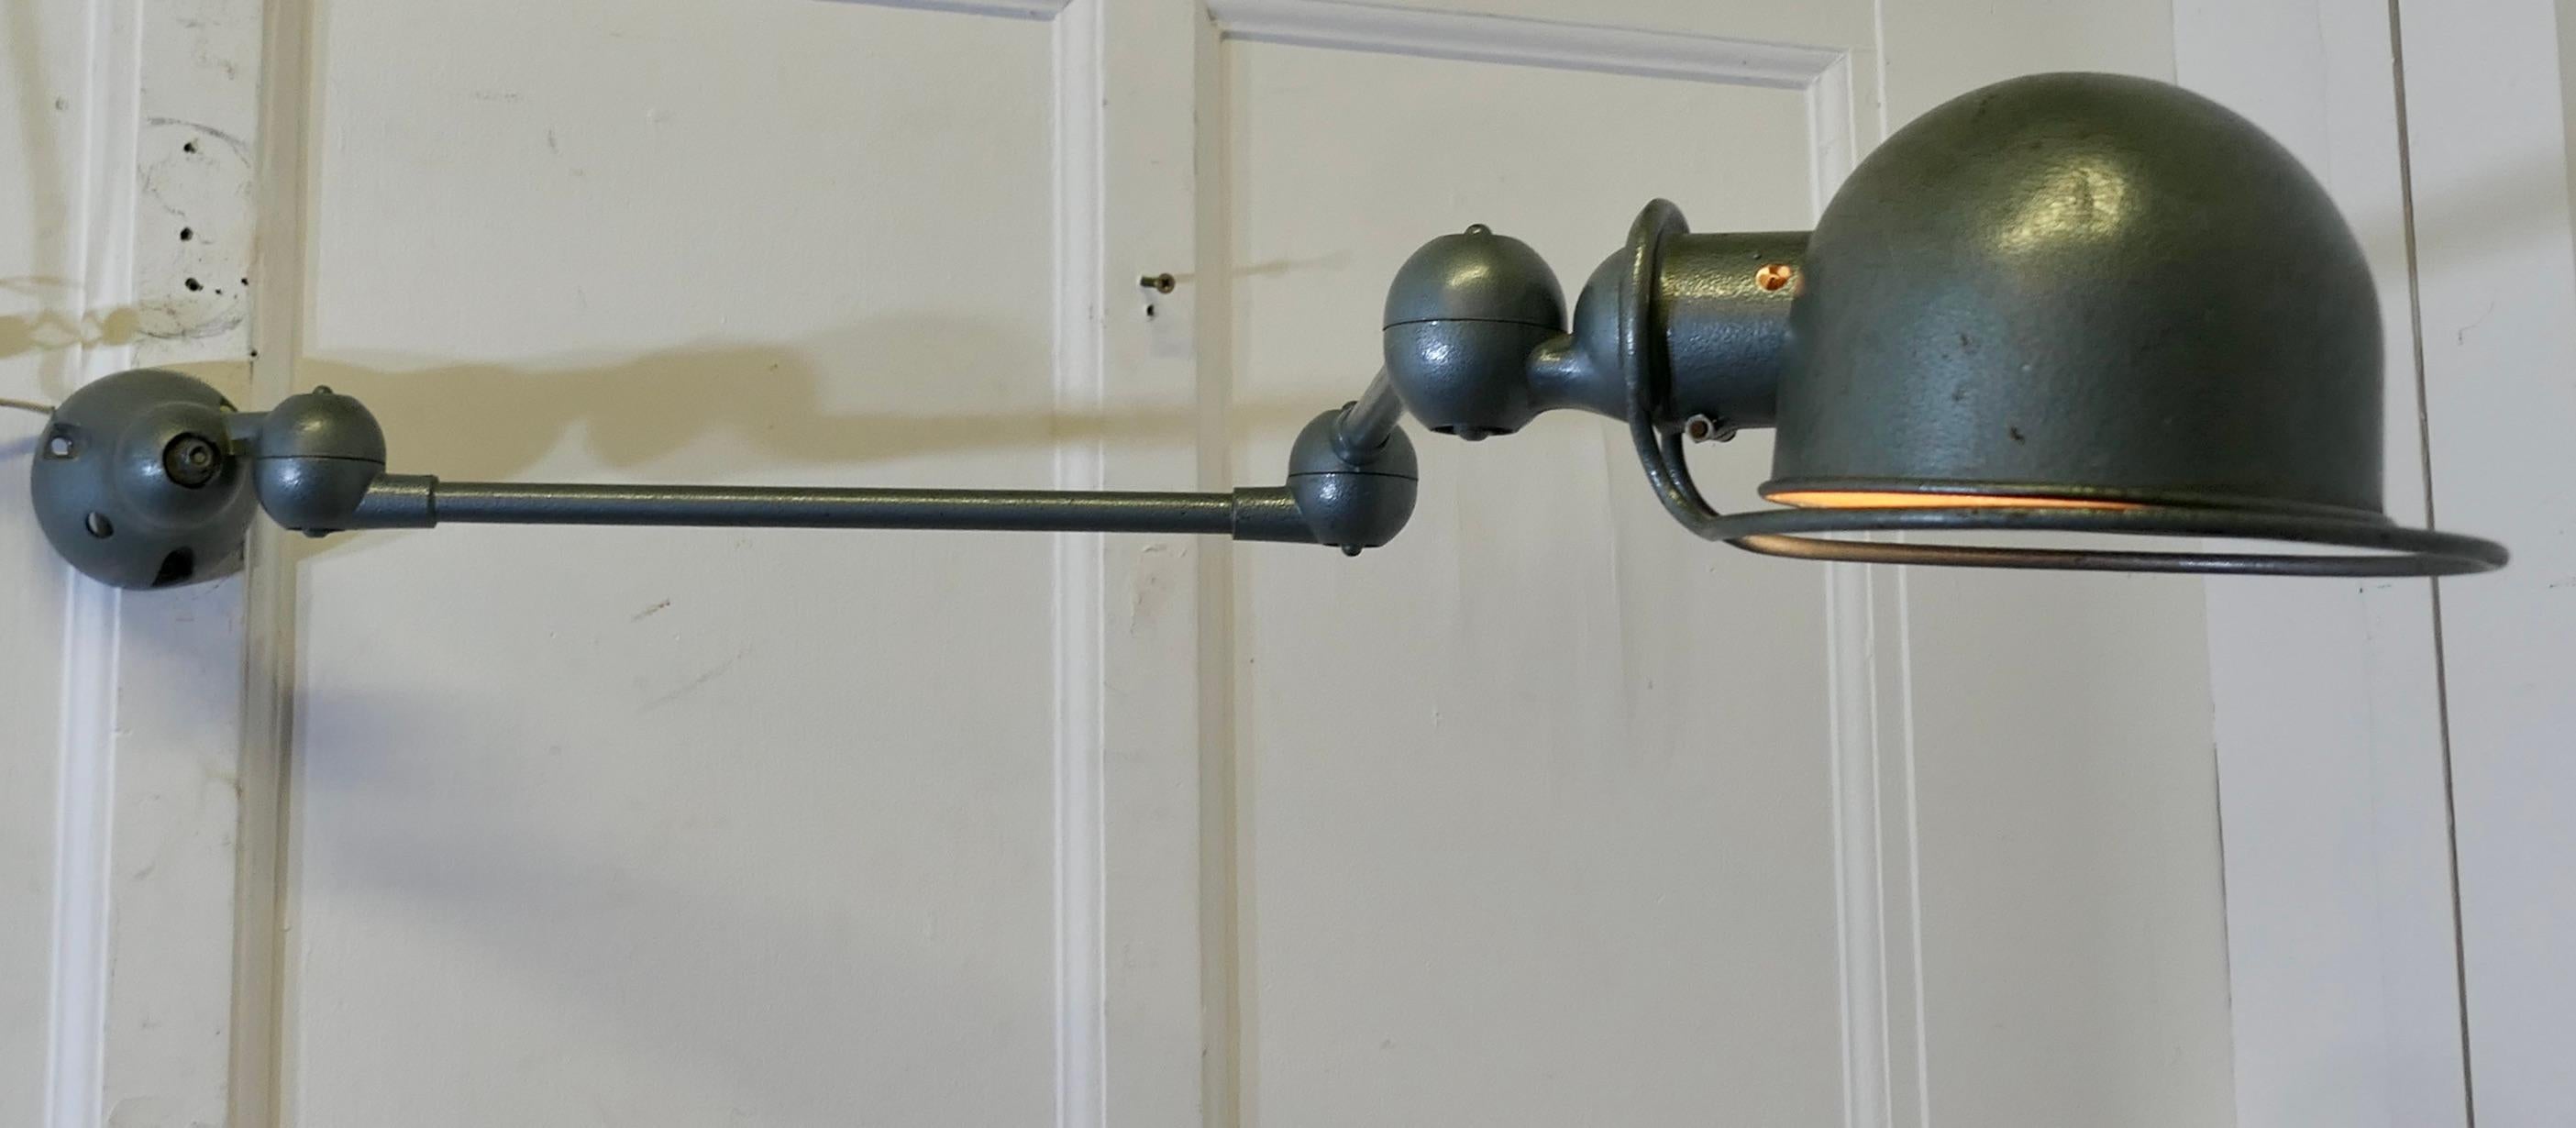 Mid-20th Century French Vintage Industrial Articulated Wall Light Sconce    For Sale